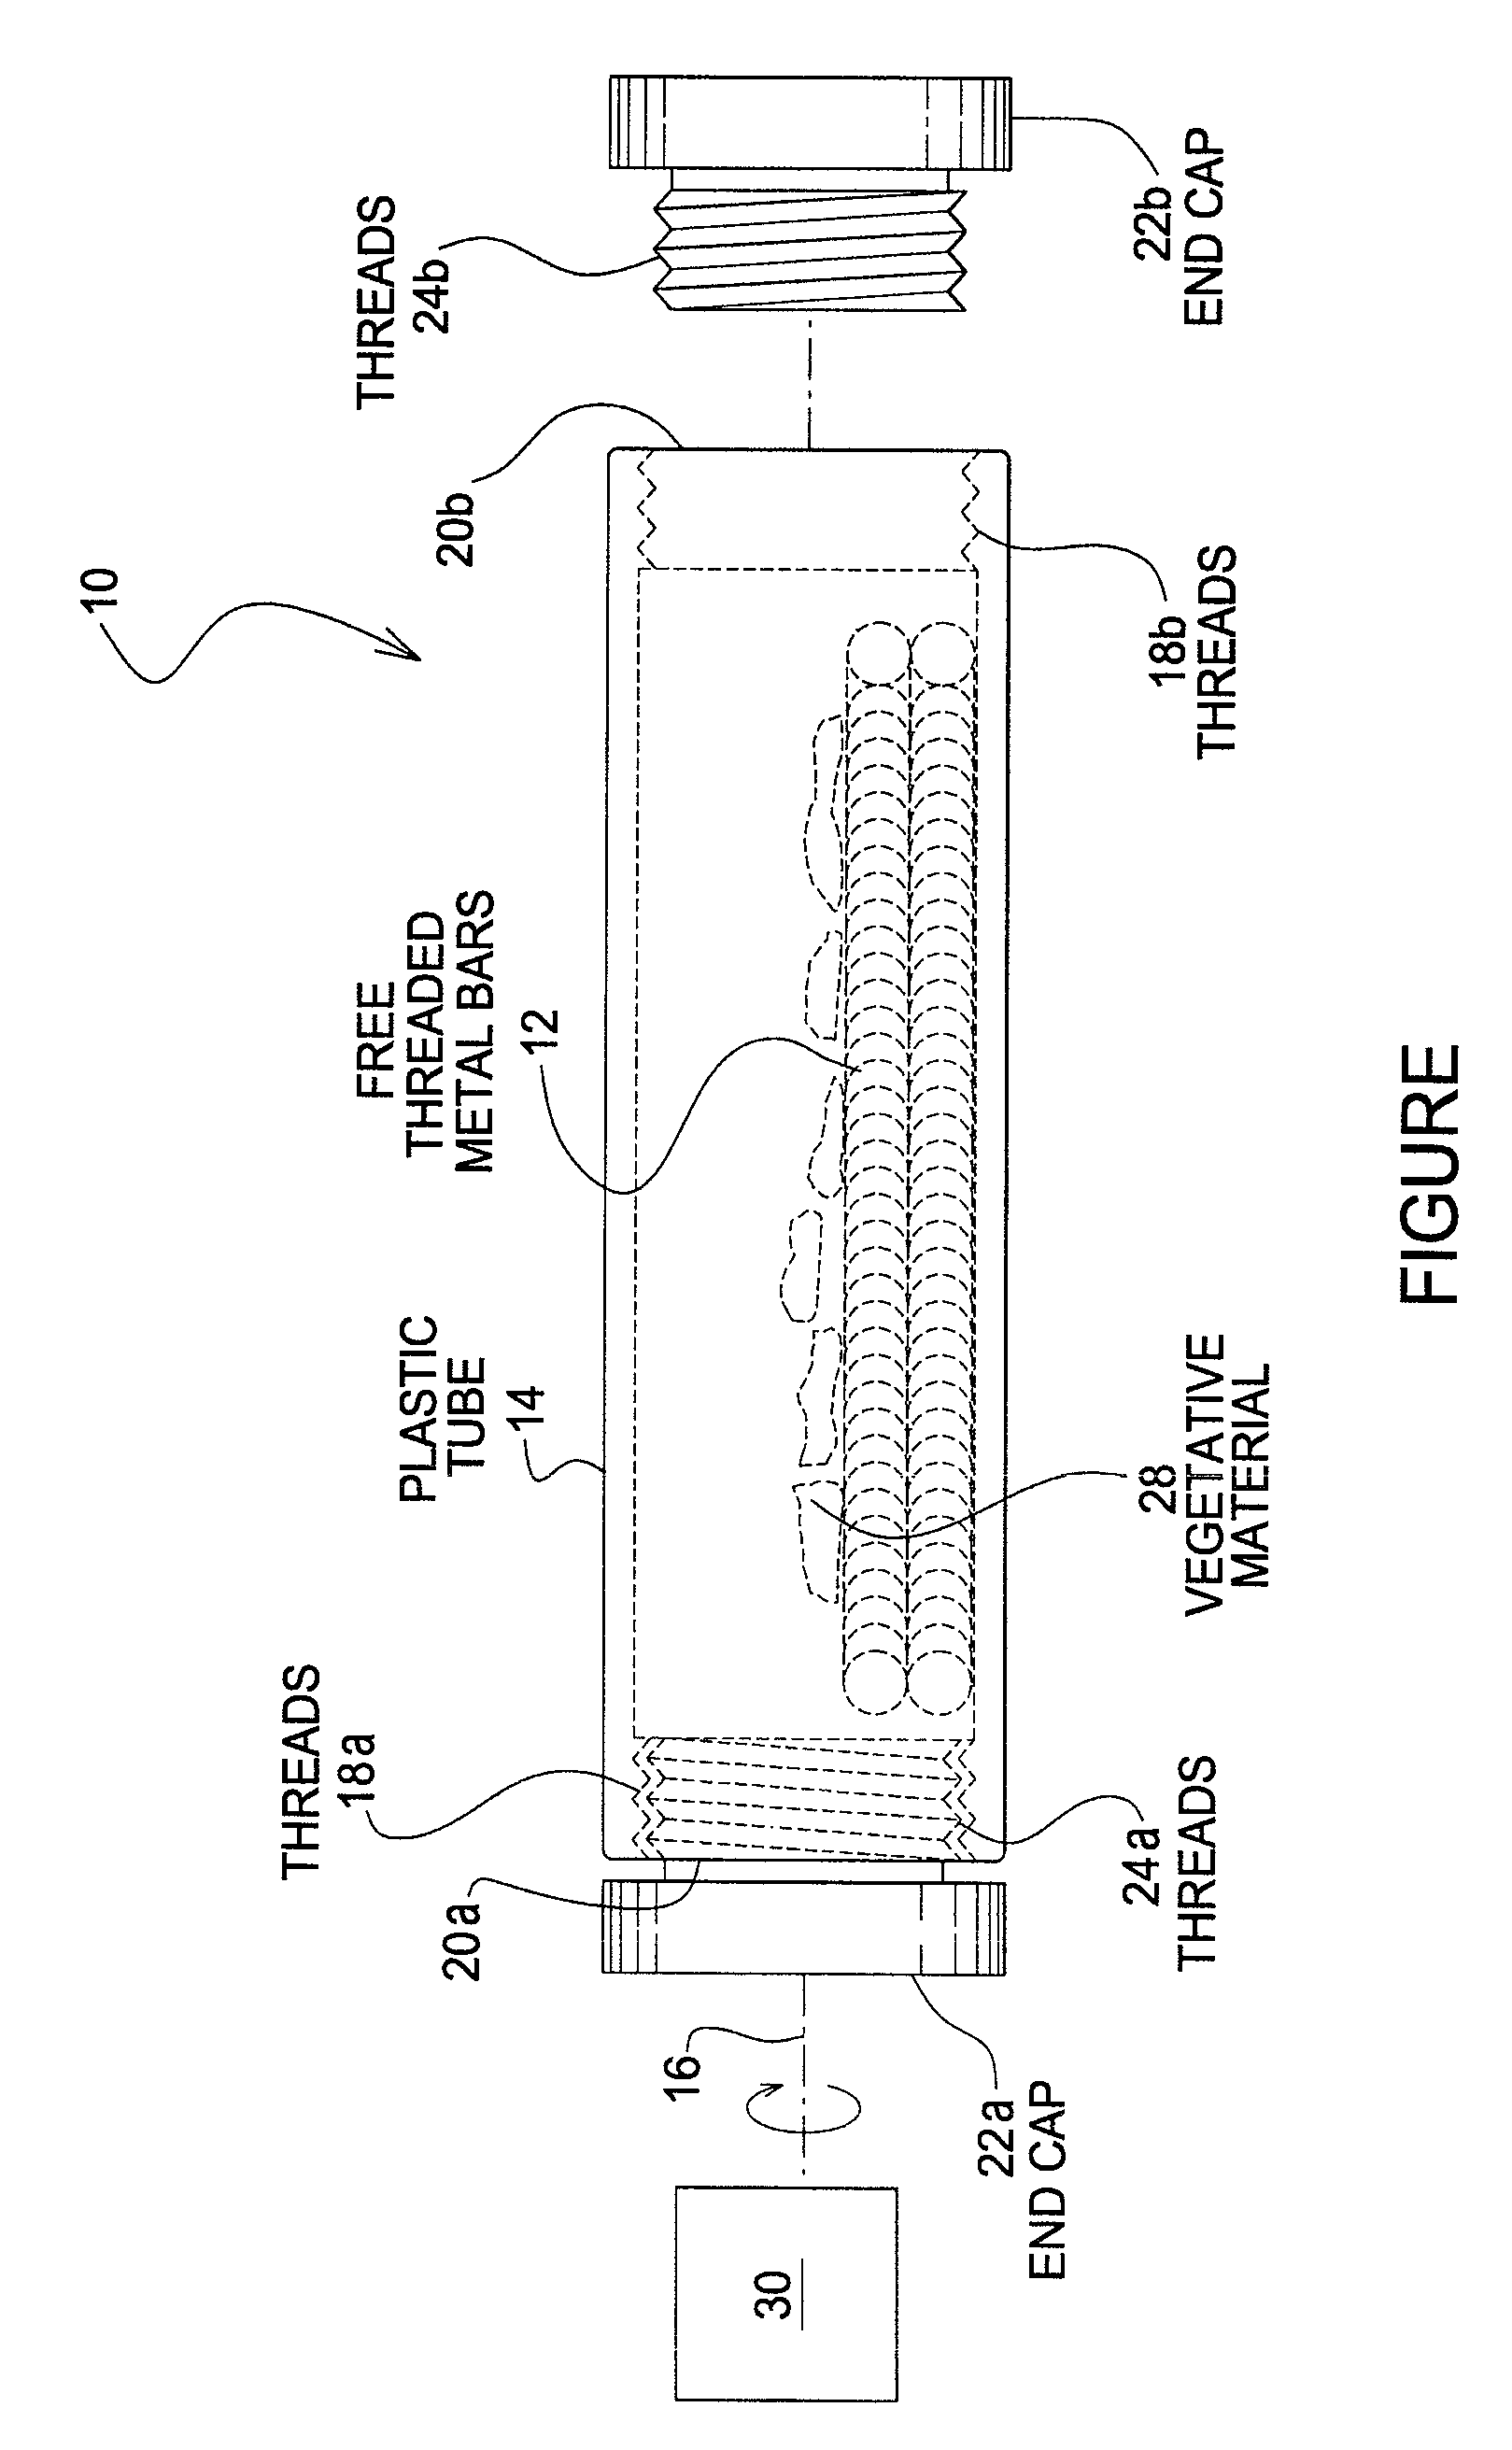 Apparatus and method for processing vegetative material